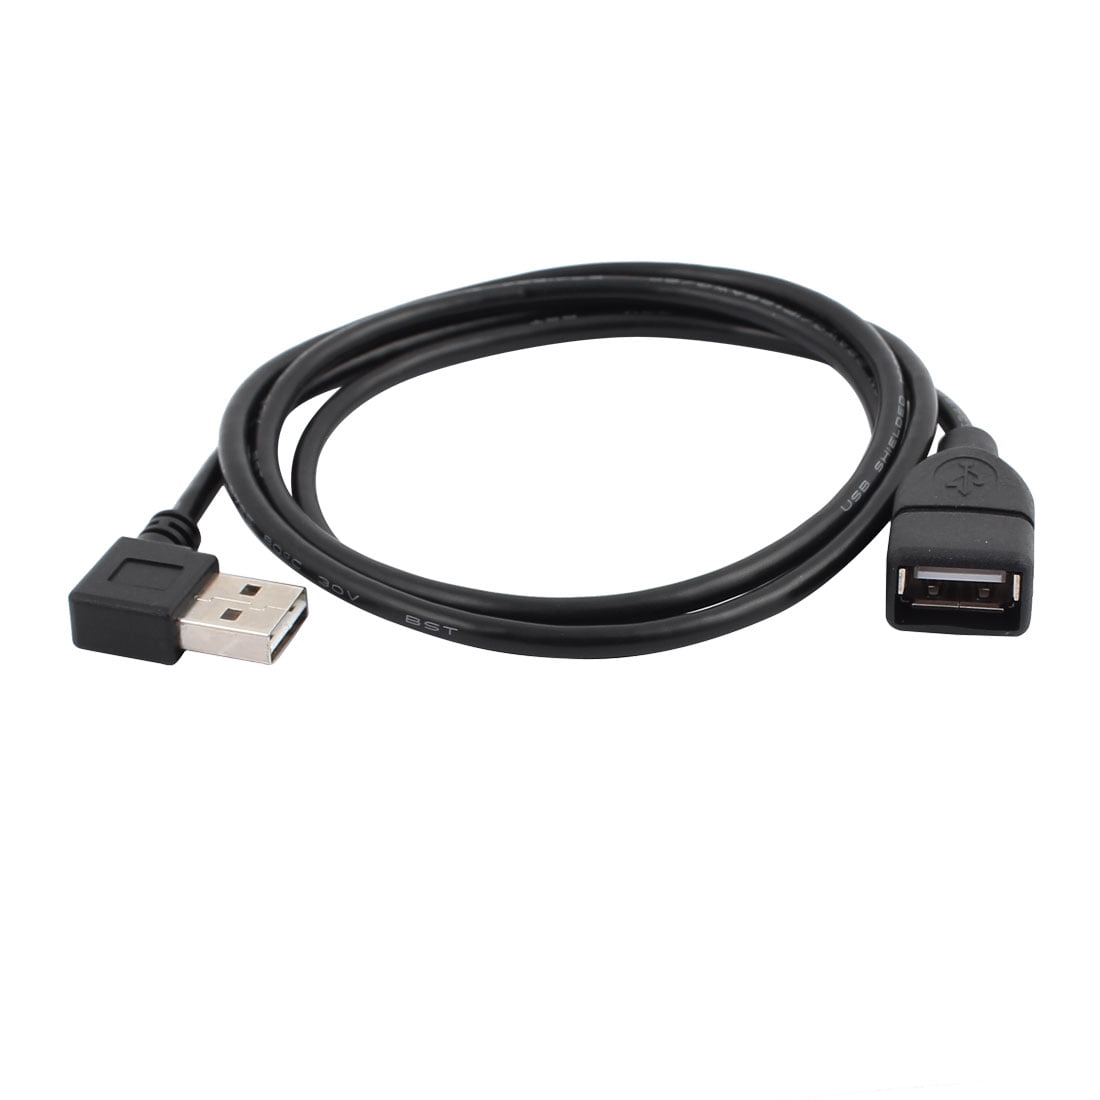 Cable Length: 20cm UP, Color: Black Computer Cables 10cm 20cm USB 2.0 A Male to Female 90 Angled Extension Adaptor Cable USB2.0 Male to Female Right/Left/Down/up Black Cable Cord